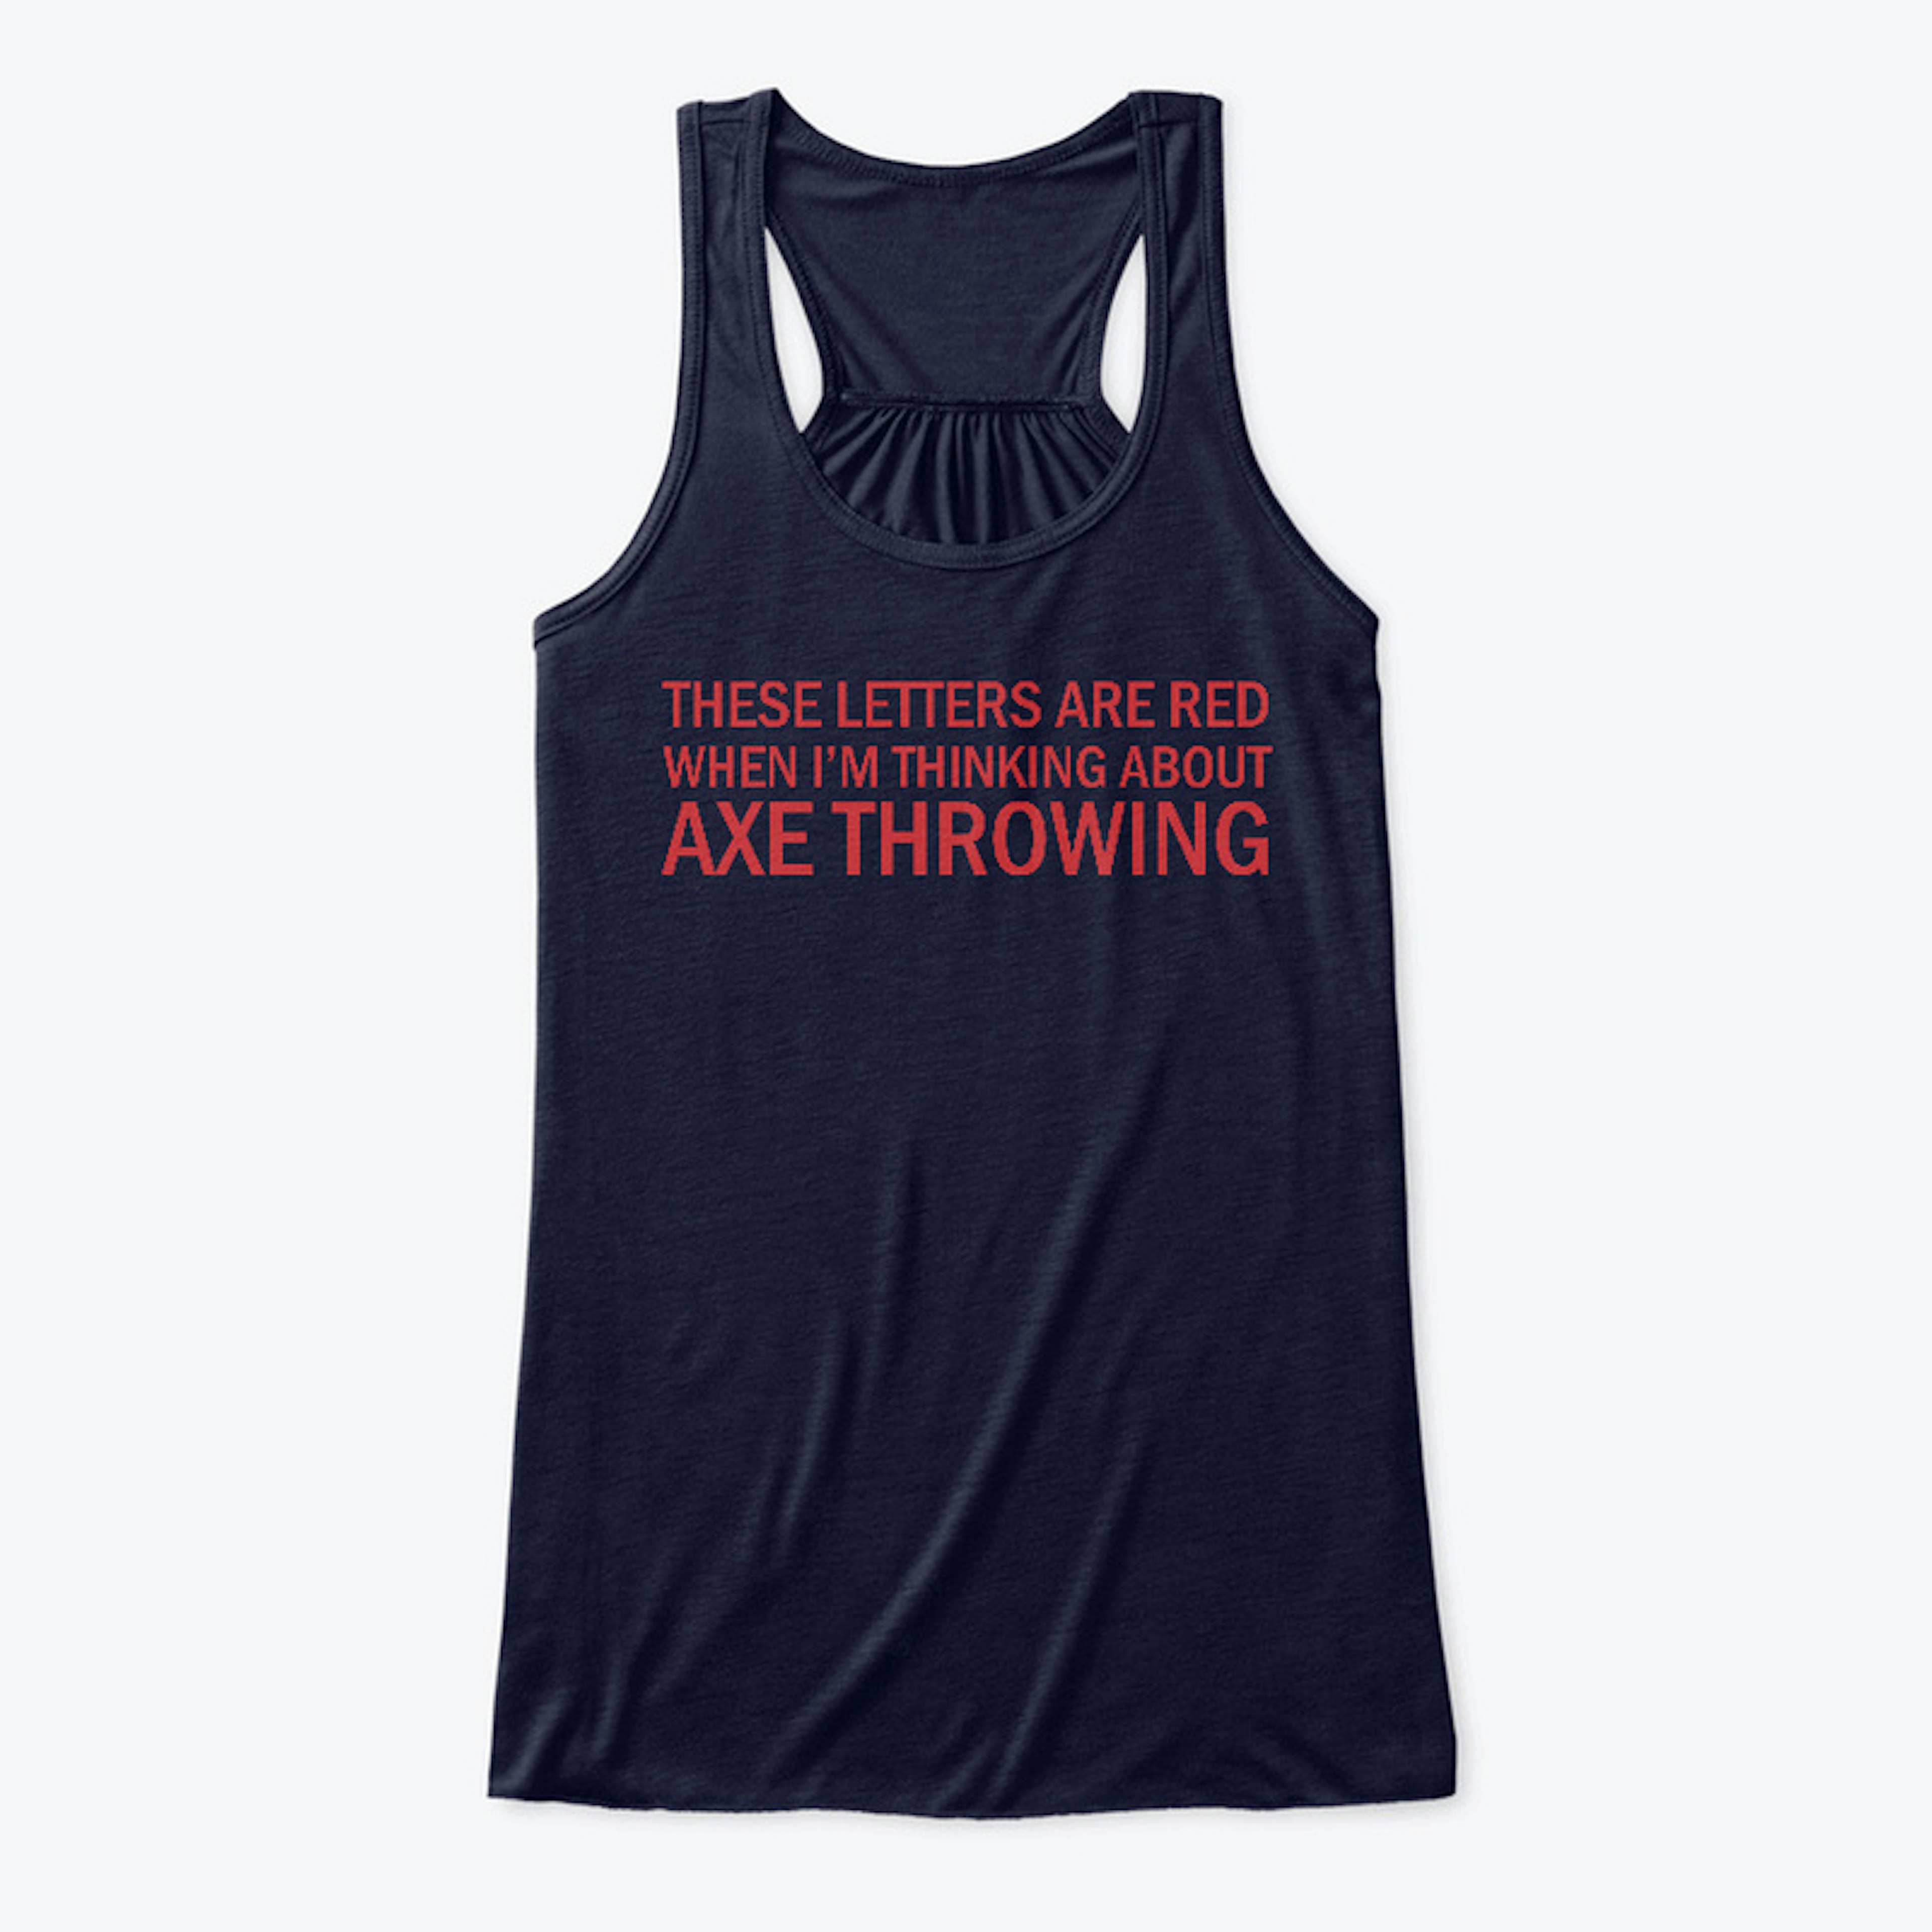 Thinking about axe throwing